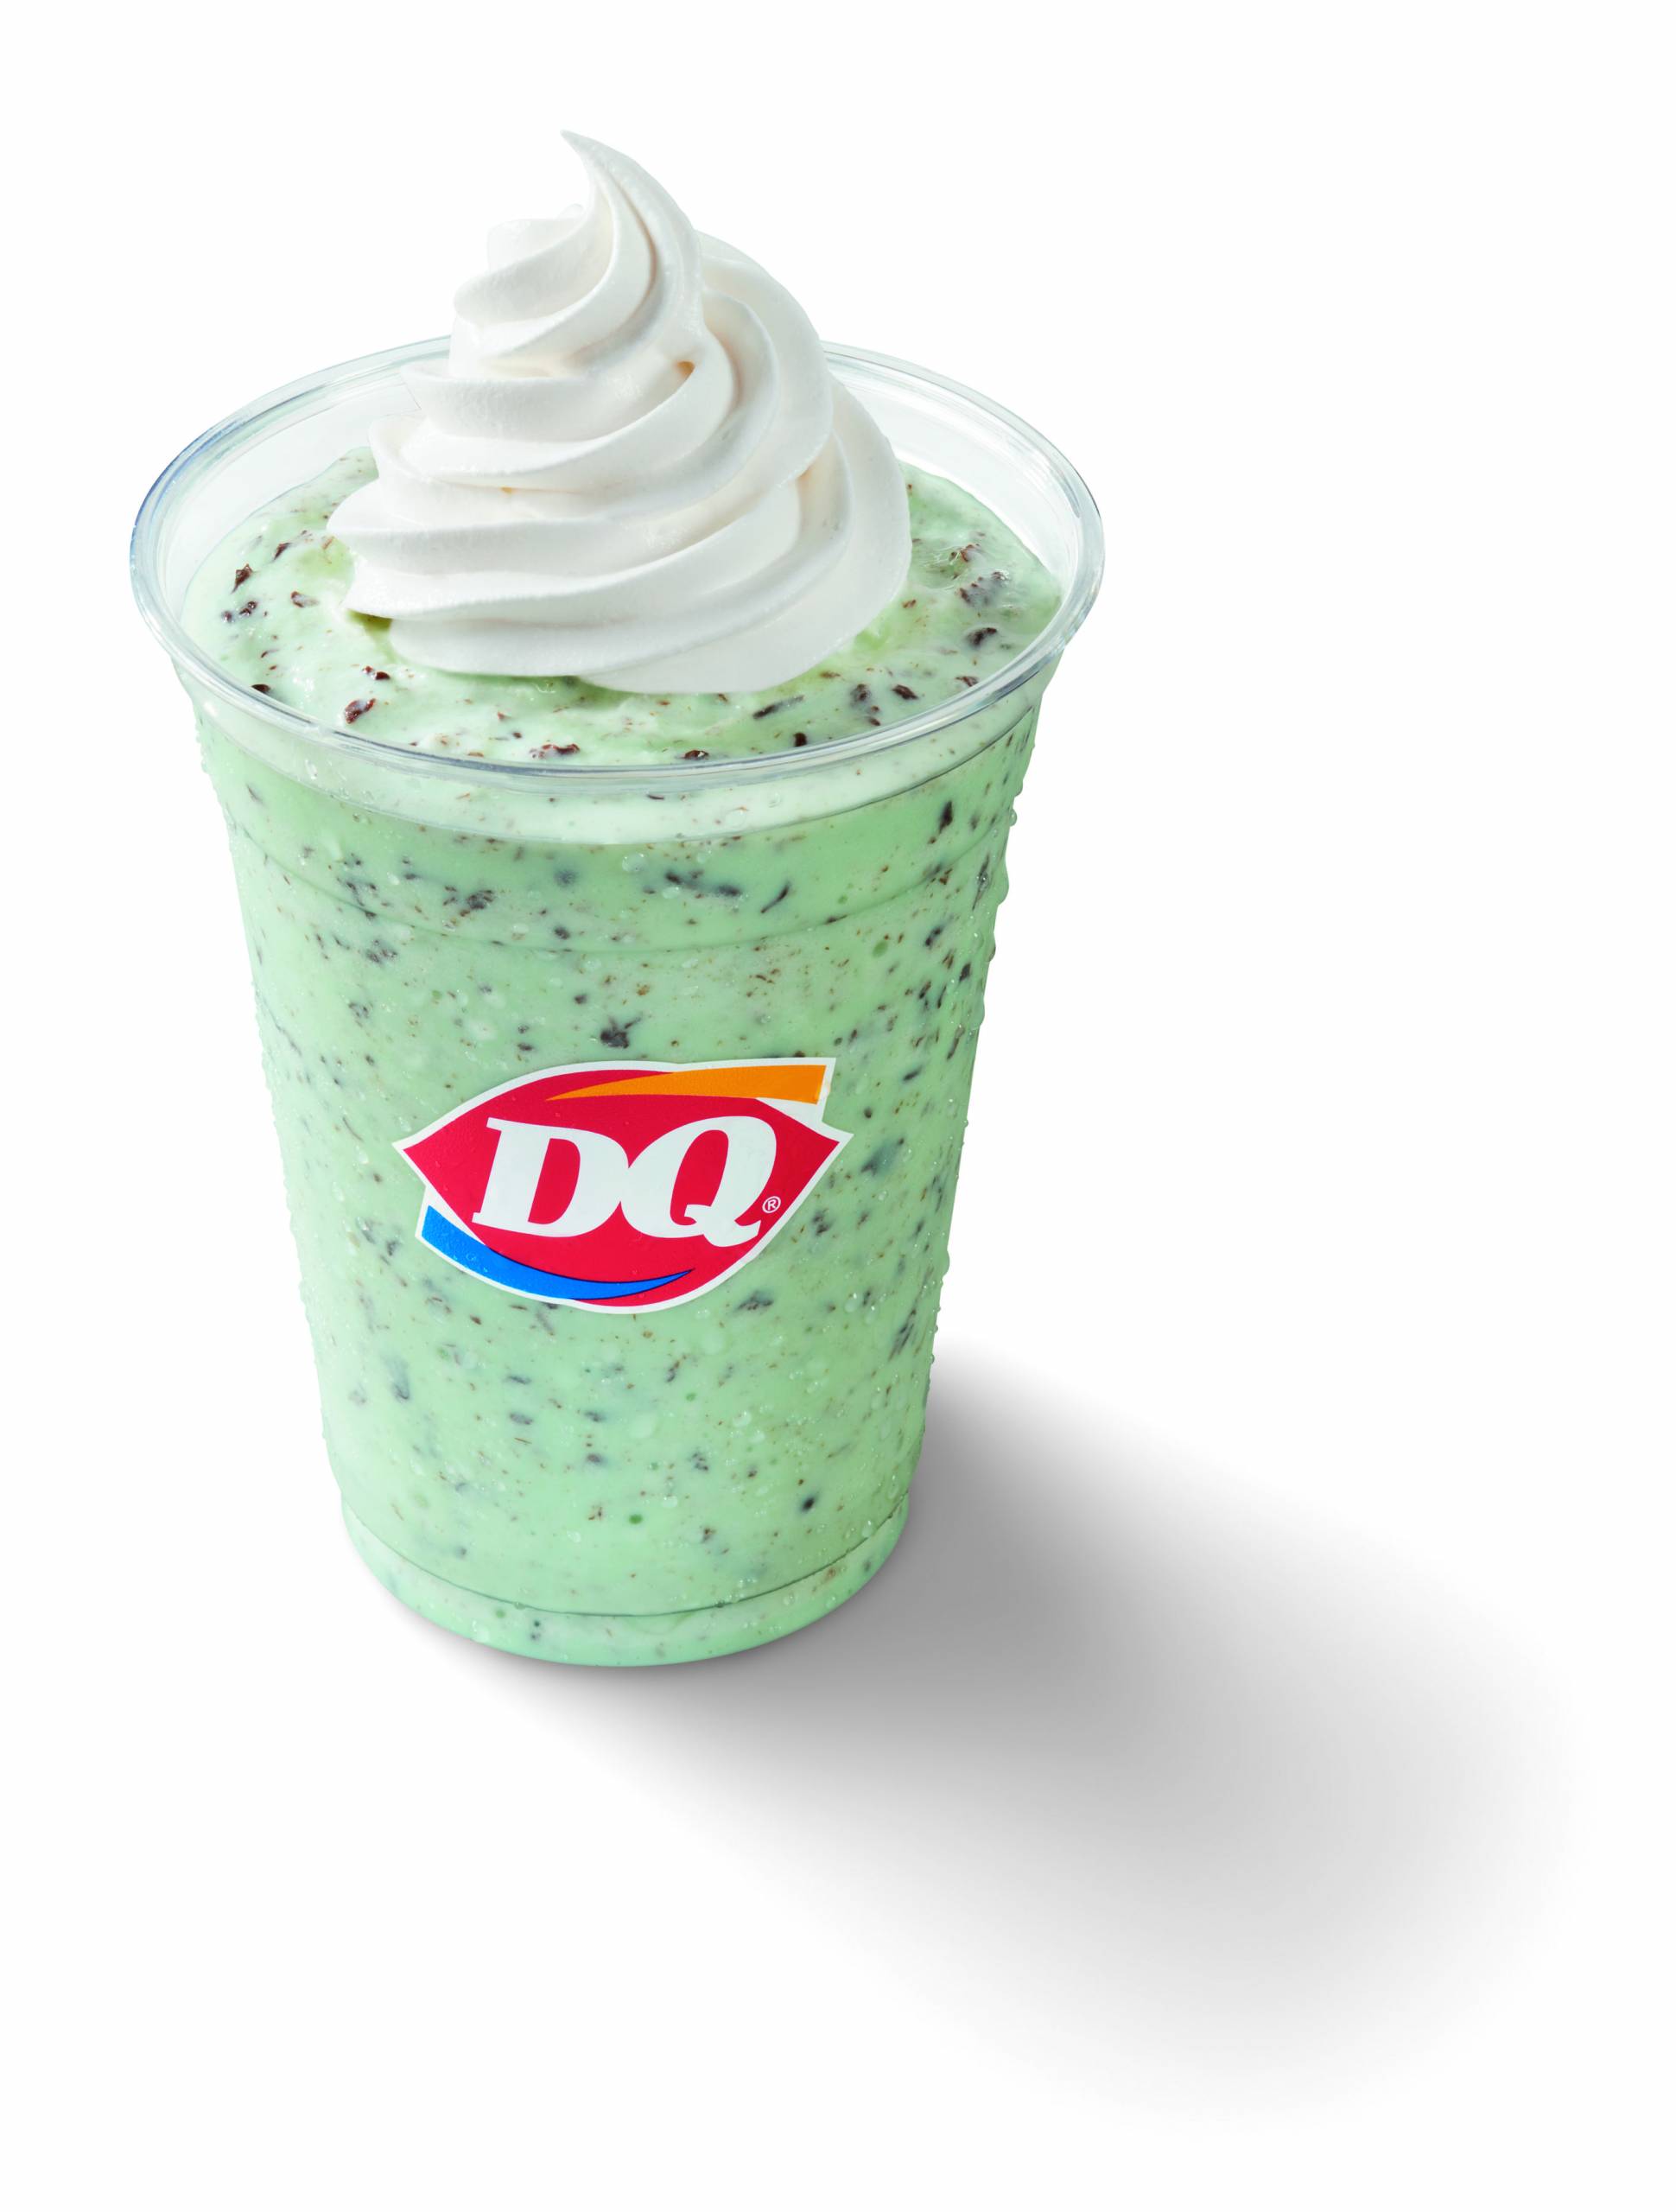 mint chip shake dq spring treat collection march 2021